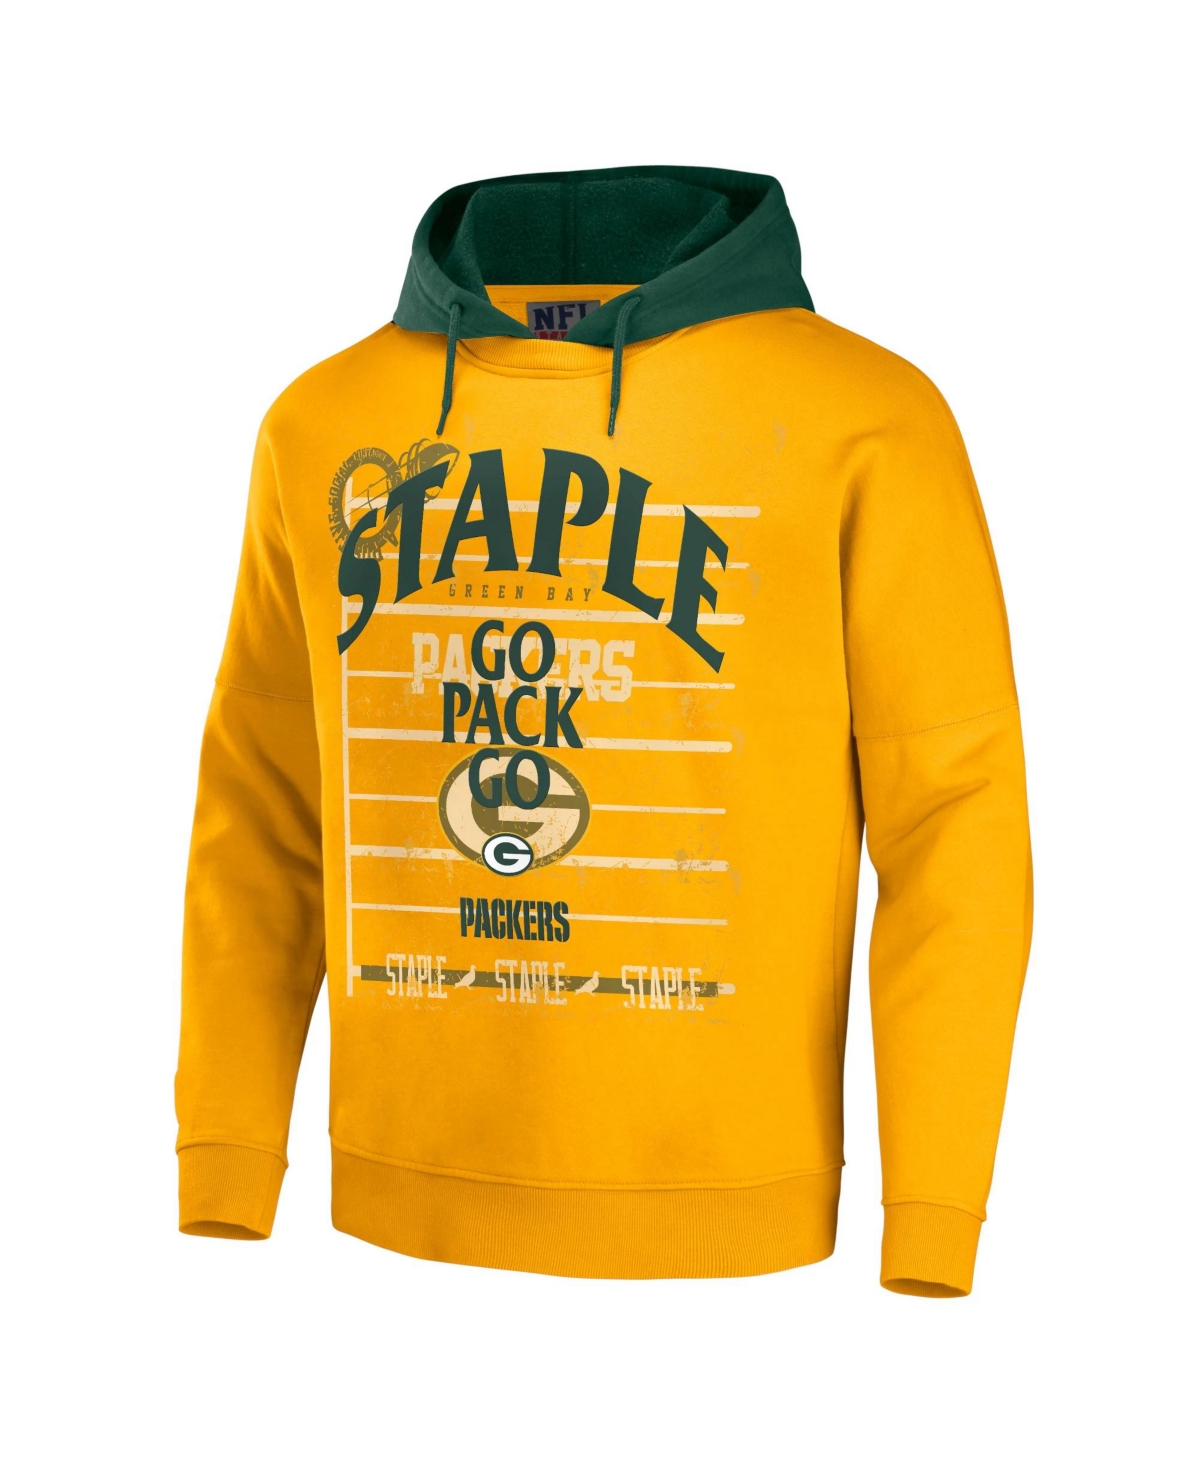 Shop Nfl Properties Men's Nfl X Staple Yellow Green Bay Packers Oversized Gridiron Vintage-like Wash Pullover Hoodie